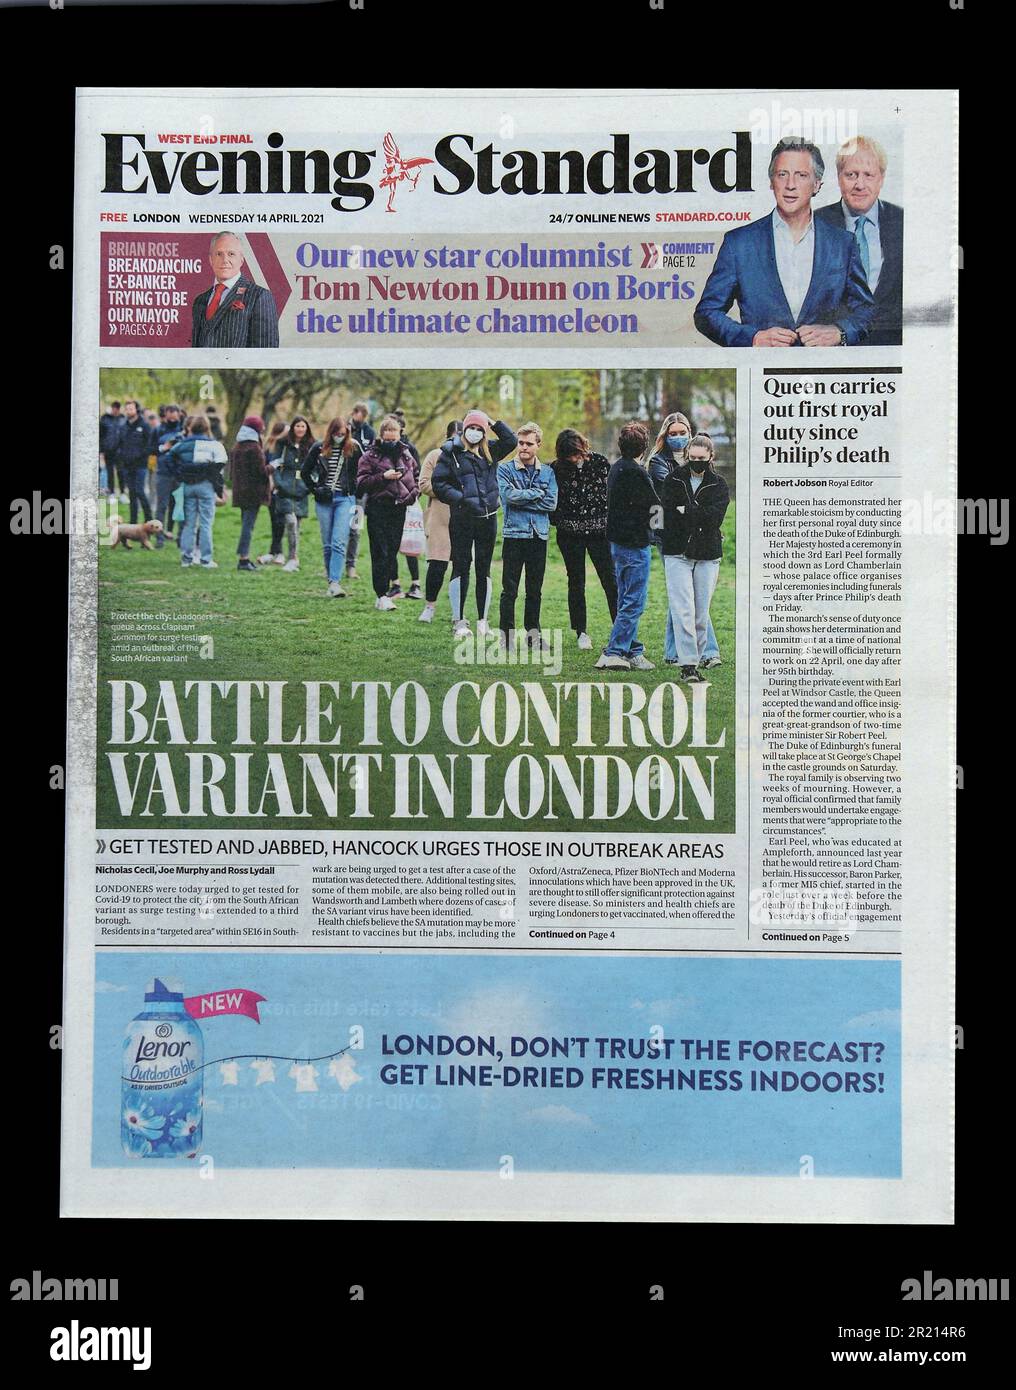 The Evening Standard dated Wednesday 14th April 2021 reports on surge testing being carried out in the UK to help stem the spread of the so-called South African variant (also known as 20H/501Y.V2 or B.1.351 and later the Beta variant) amid the COVID-19 coronavirus pandemic. Stock Photo